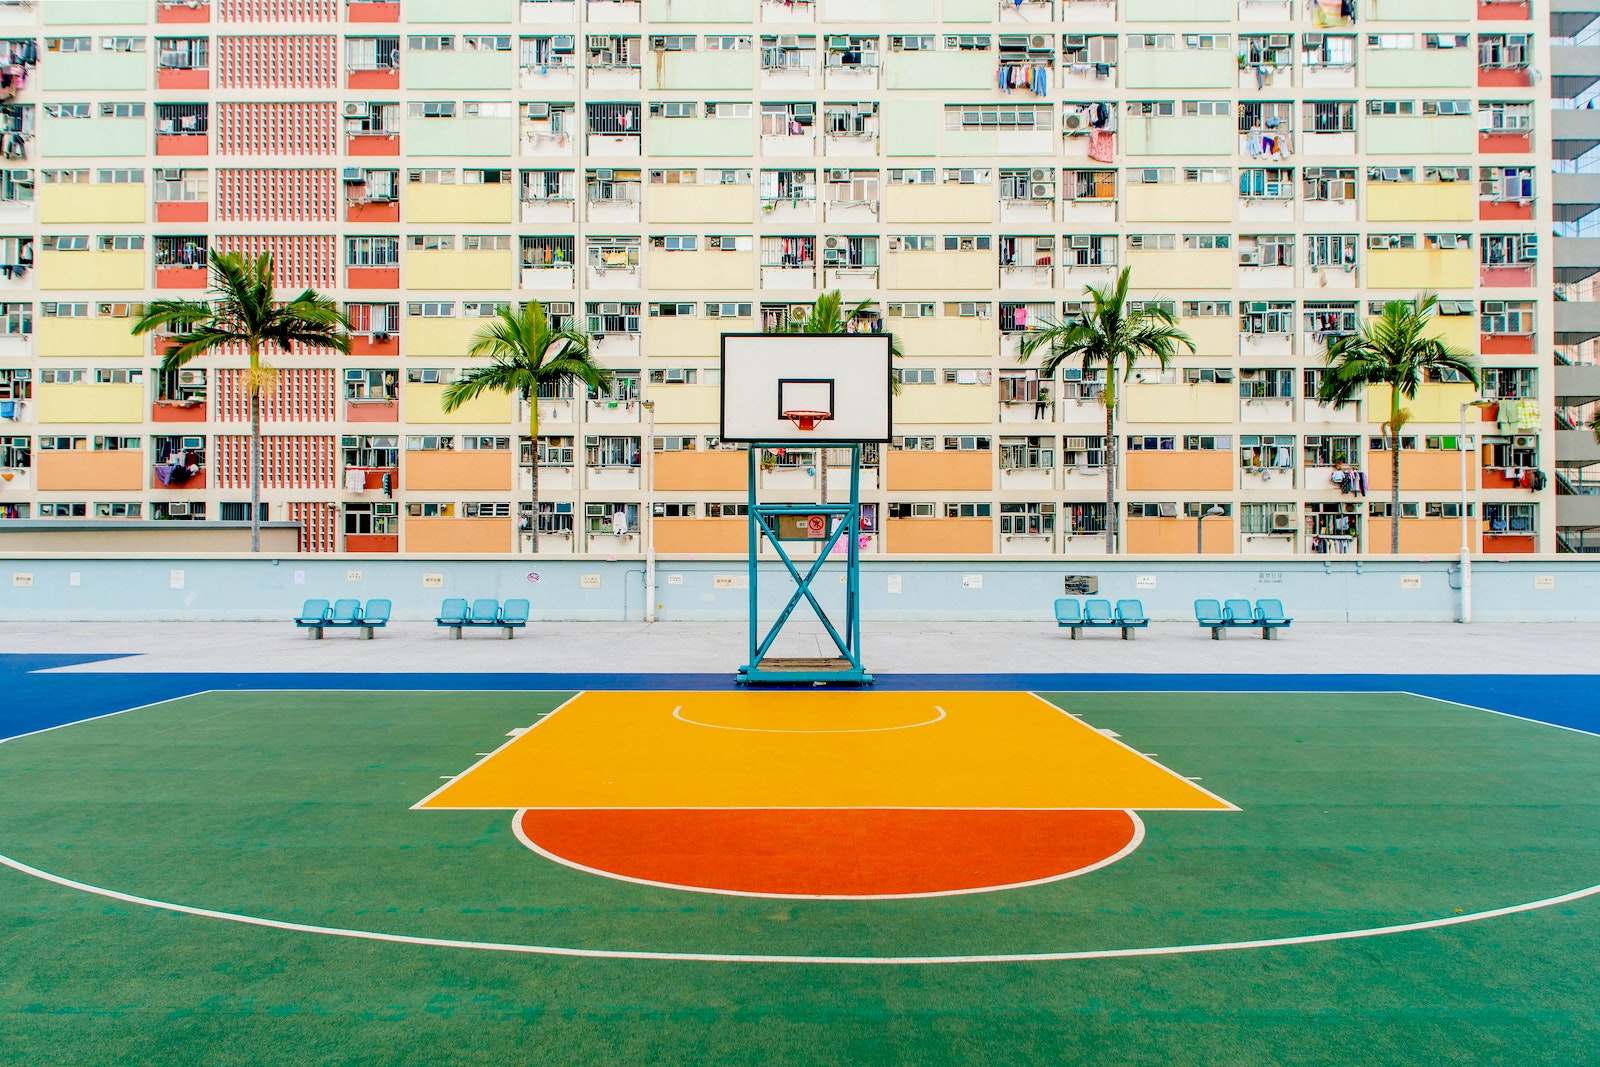 How To Paint A Concrete Basketball Court - Workshopedia